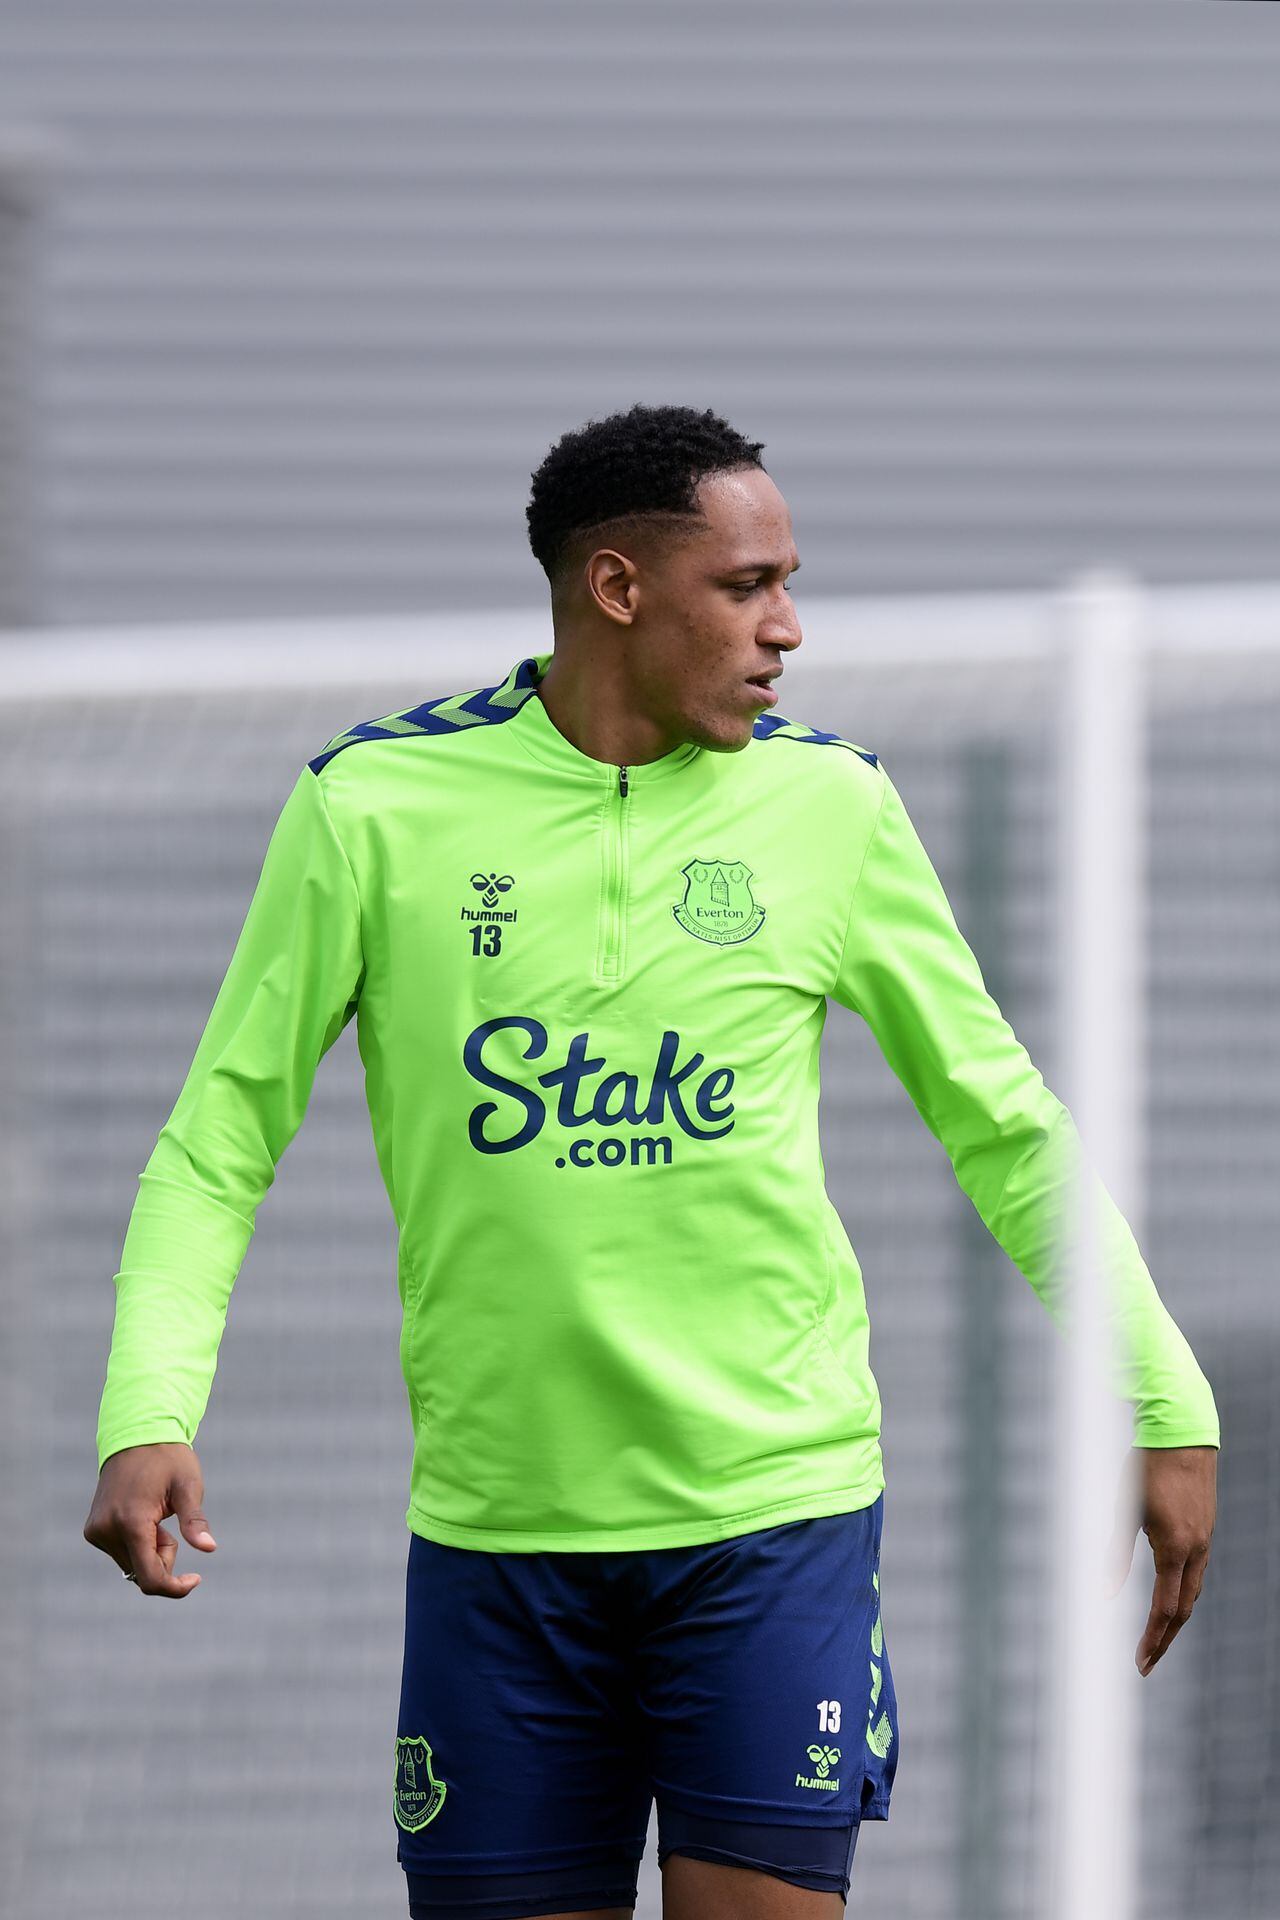 HALEWOOD, ENGLAND - MAY 18: (EXCLUSIVE COVERAGE) Yerry Mina during the Everton Training Session at Finch Farm on May 18, 2023 in Halewood, England.  (Photo by Tony McArdle/Everton FC via Getty Images)